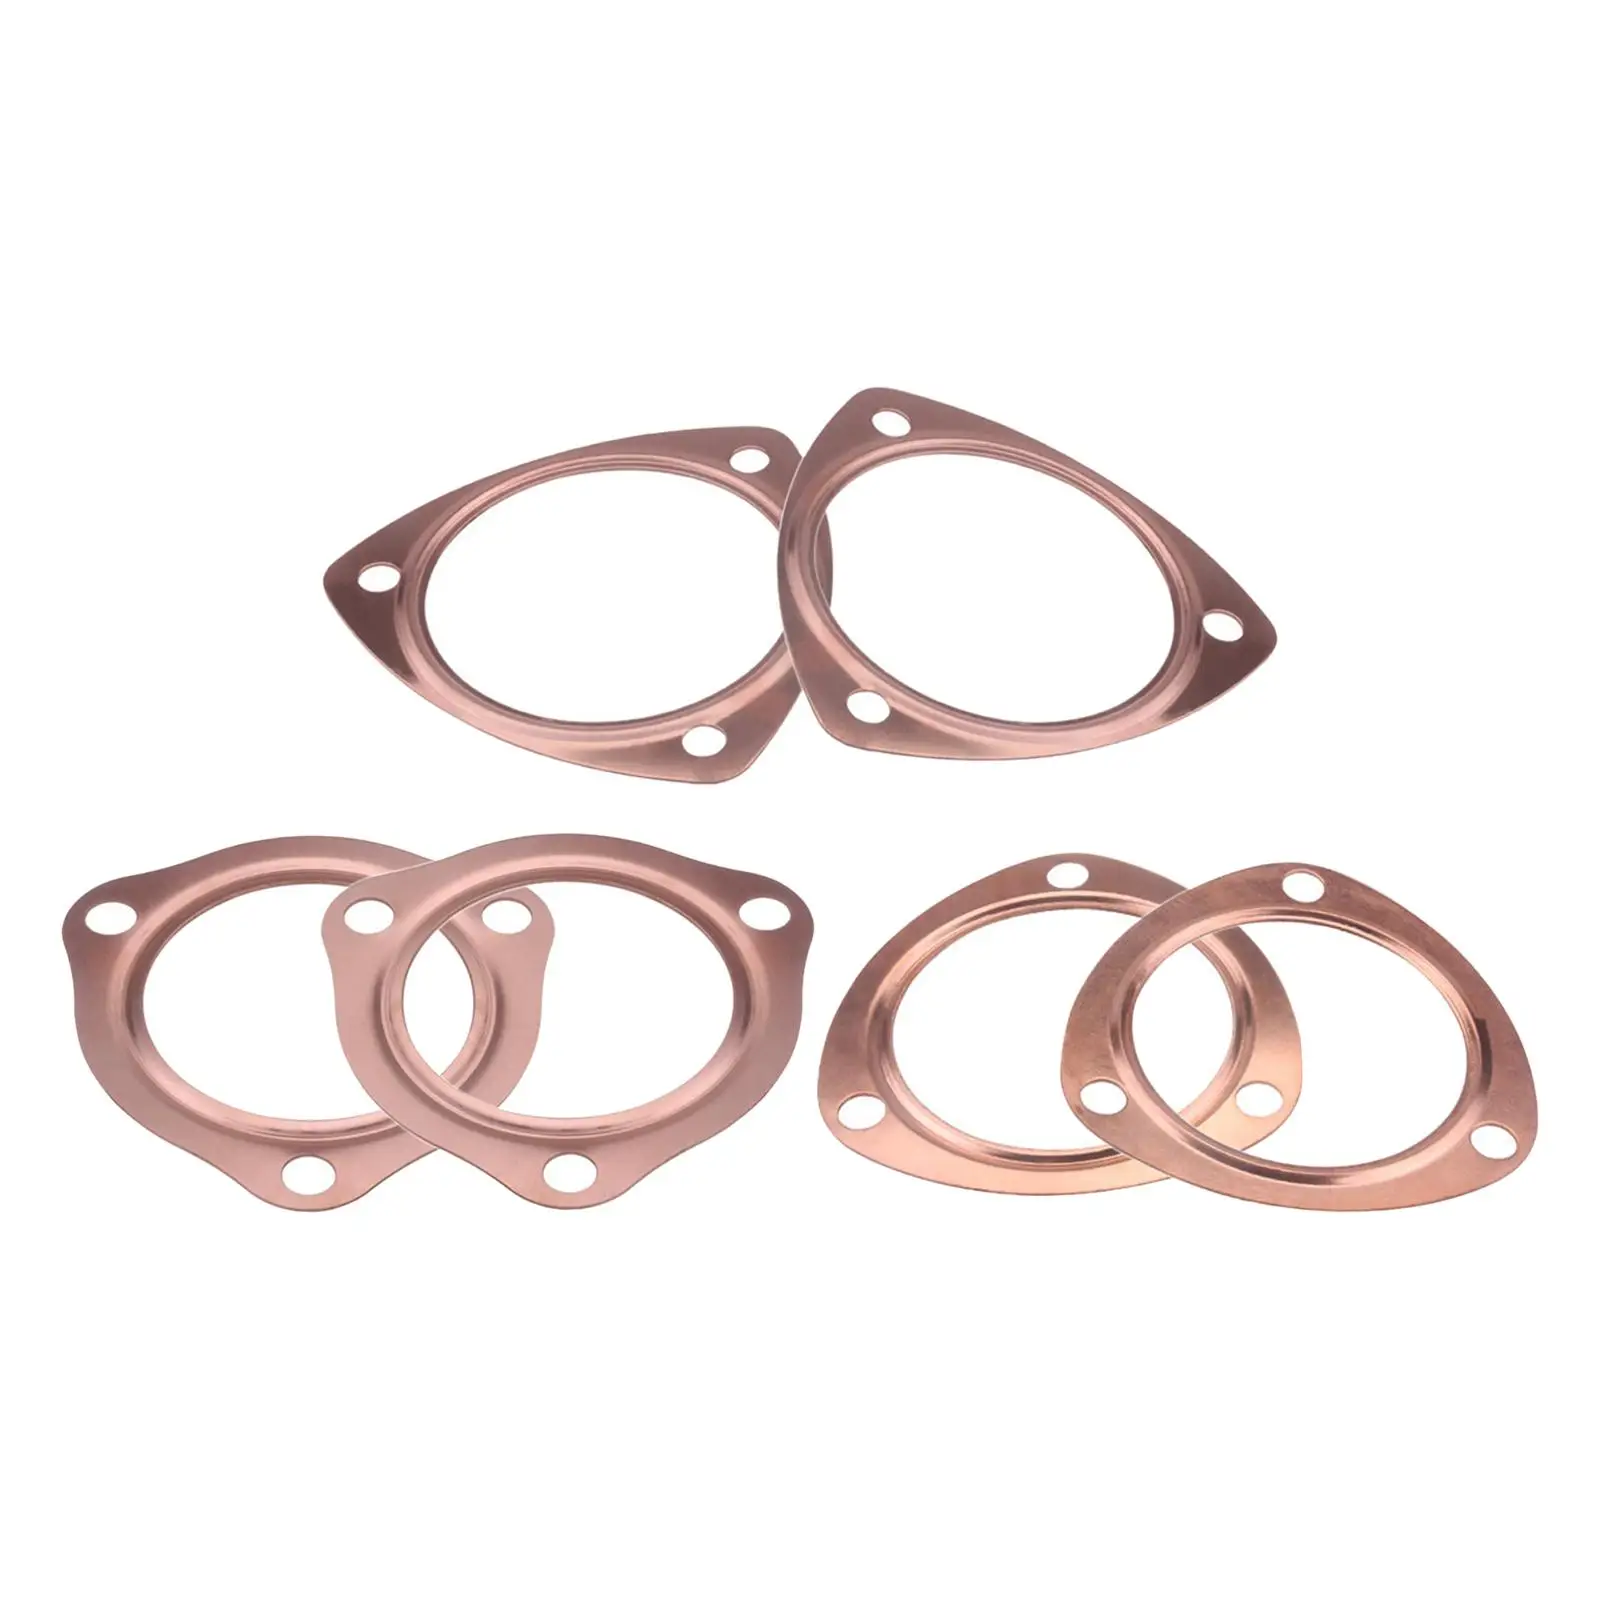 Header Collector Gaskets Anti Scratch for Sbc 302 350 454 Replaces